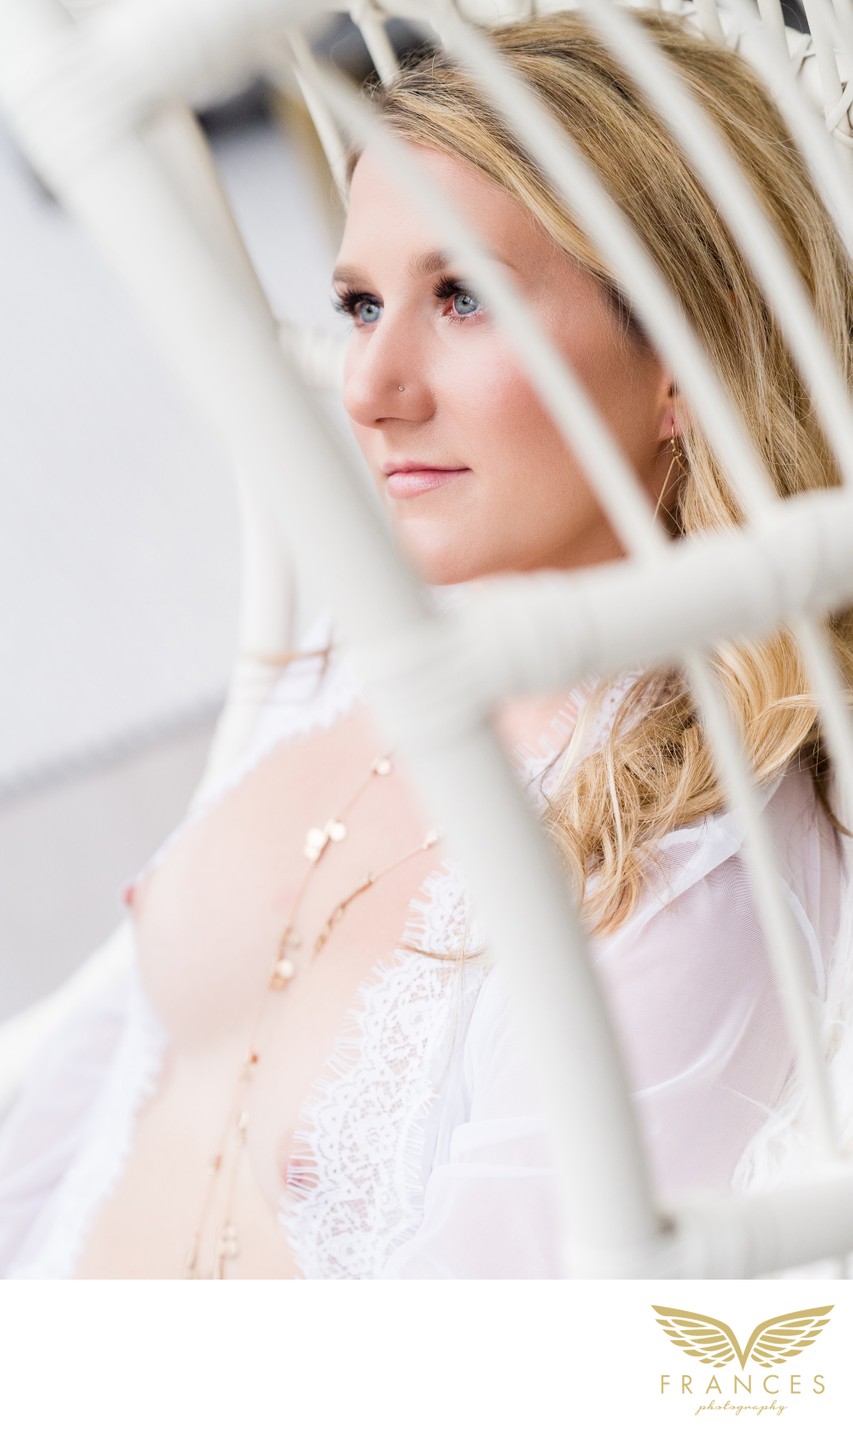 Intimate Photography from a Bridal Boudoir Photo Shoot